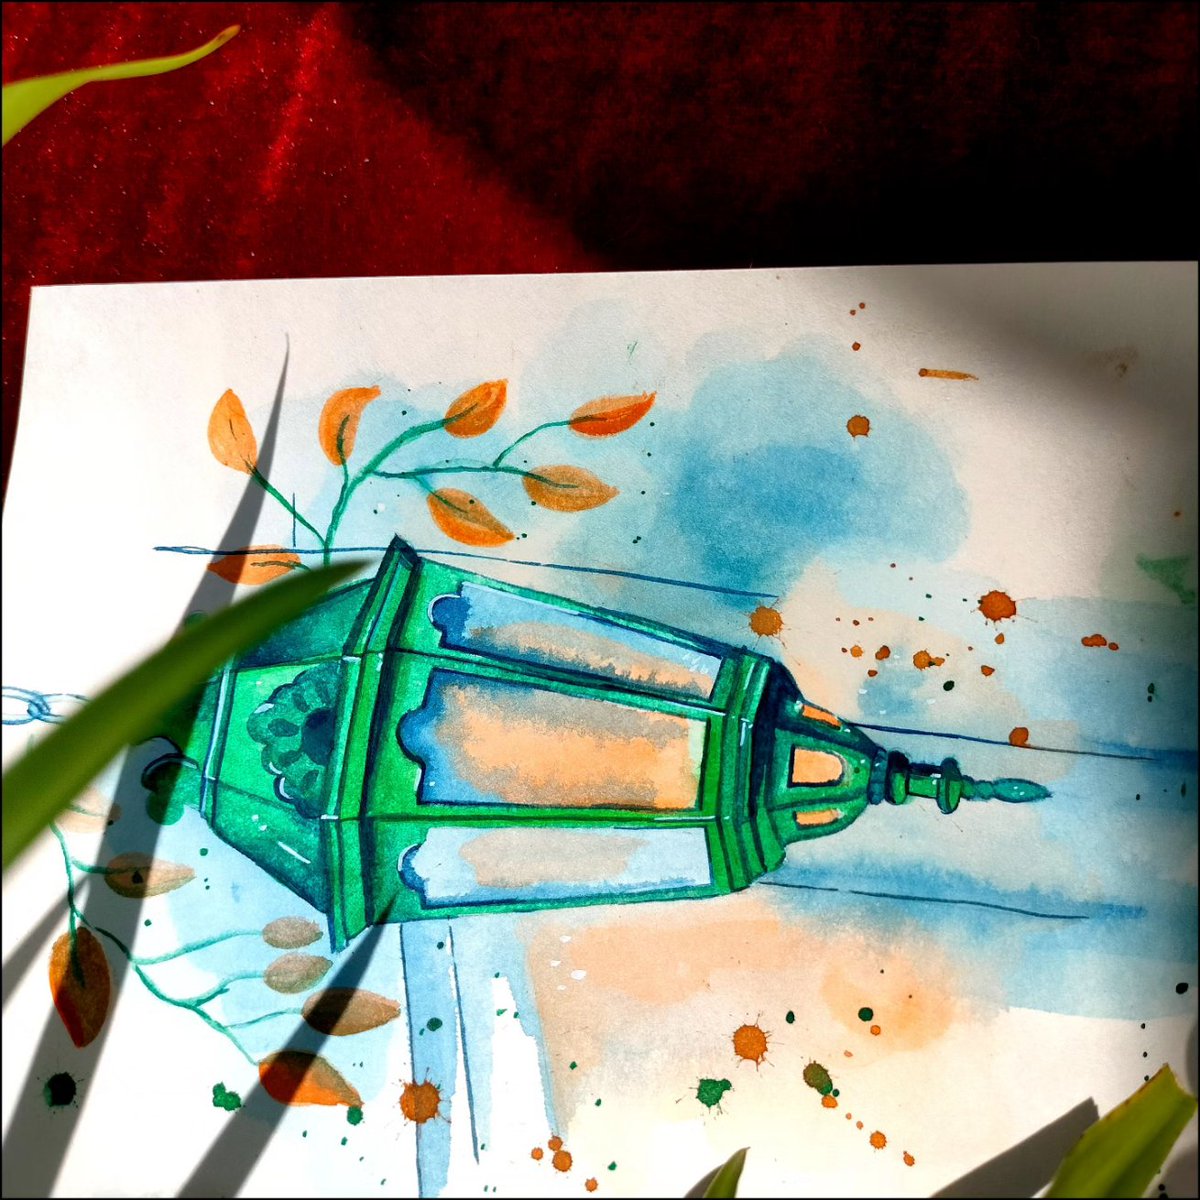 If you light a lamp for someone else it will also brighten your path.
.
Water colour painting 🖌️🎨
.
.
.
.
#rolloartgallery #rollo #rolloartgallerymeerut #rolloradhika #watercolor #waterpainting #watercolourpainting #watercolorart #watercolourinspiration #water #watercolordrawing